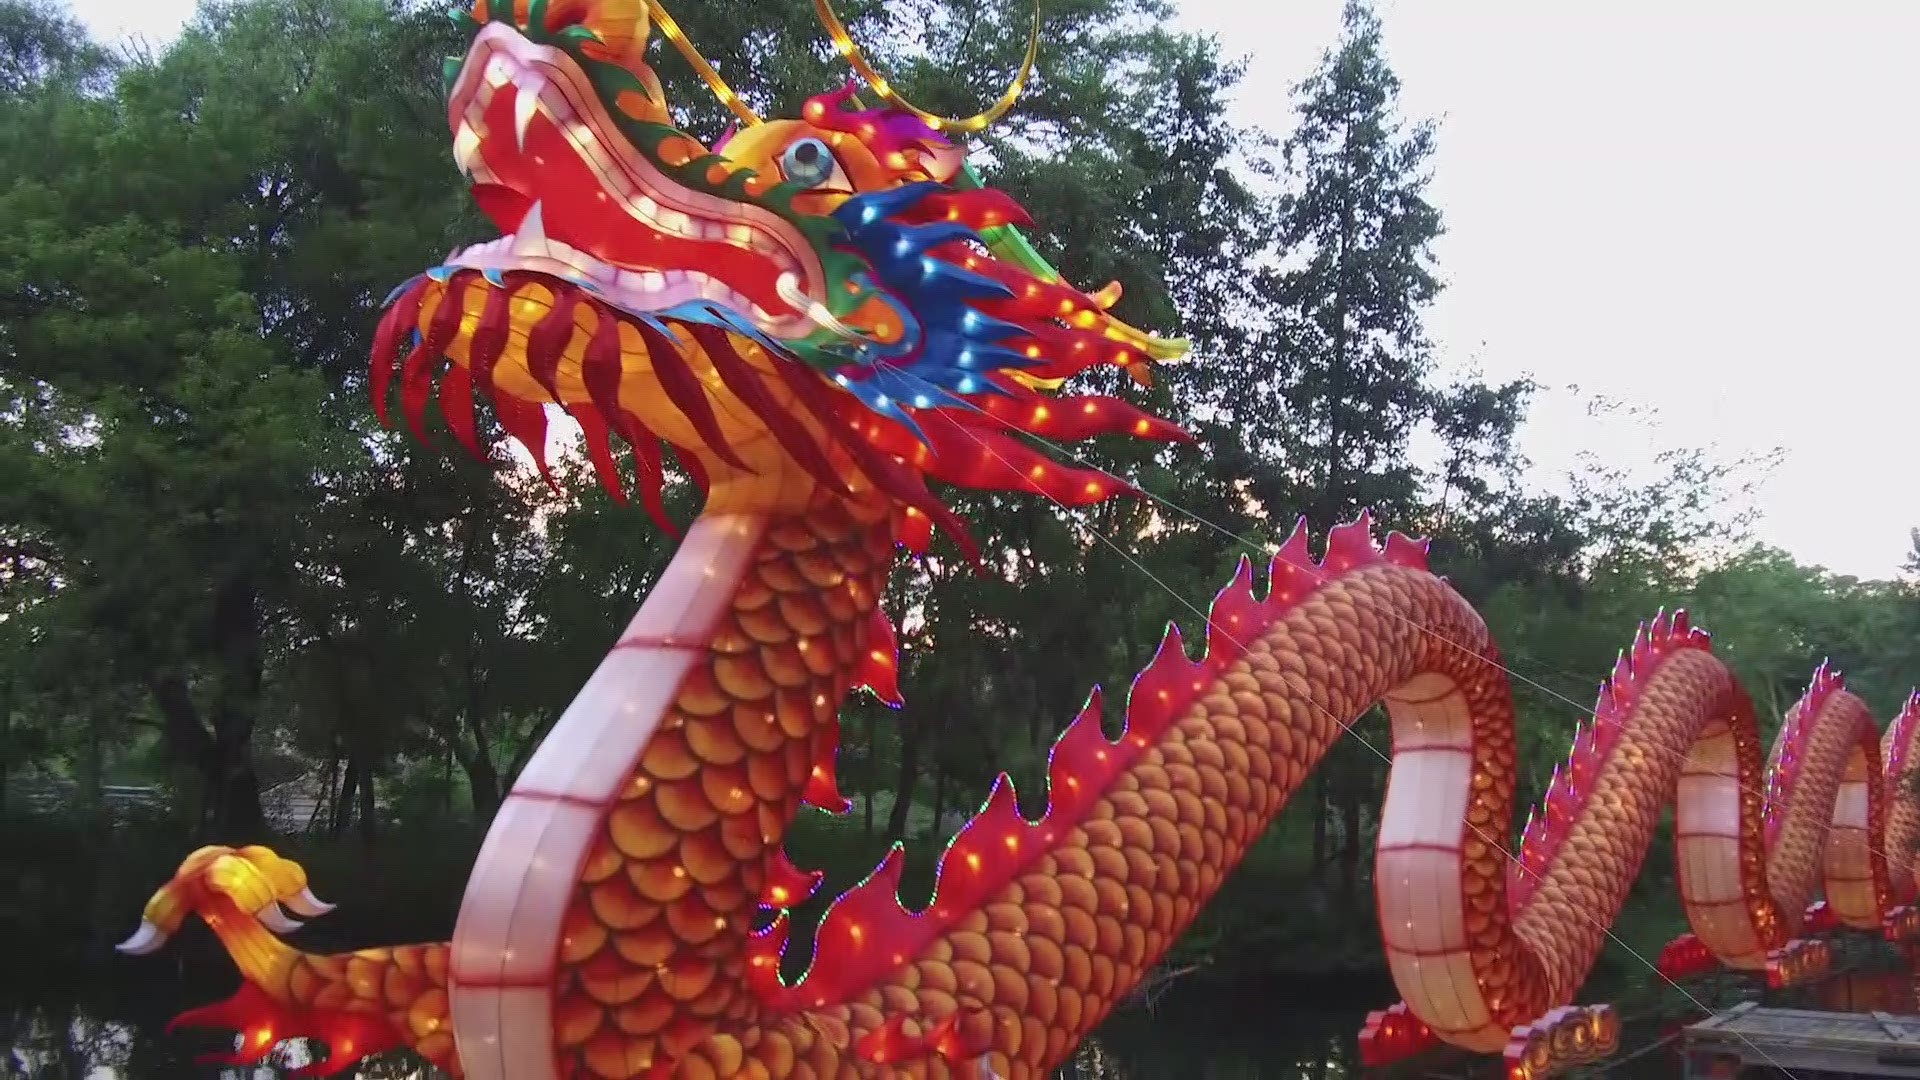 Asian Lantern Festival brings brightness and culture to Cleveland Zoo